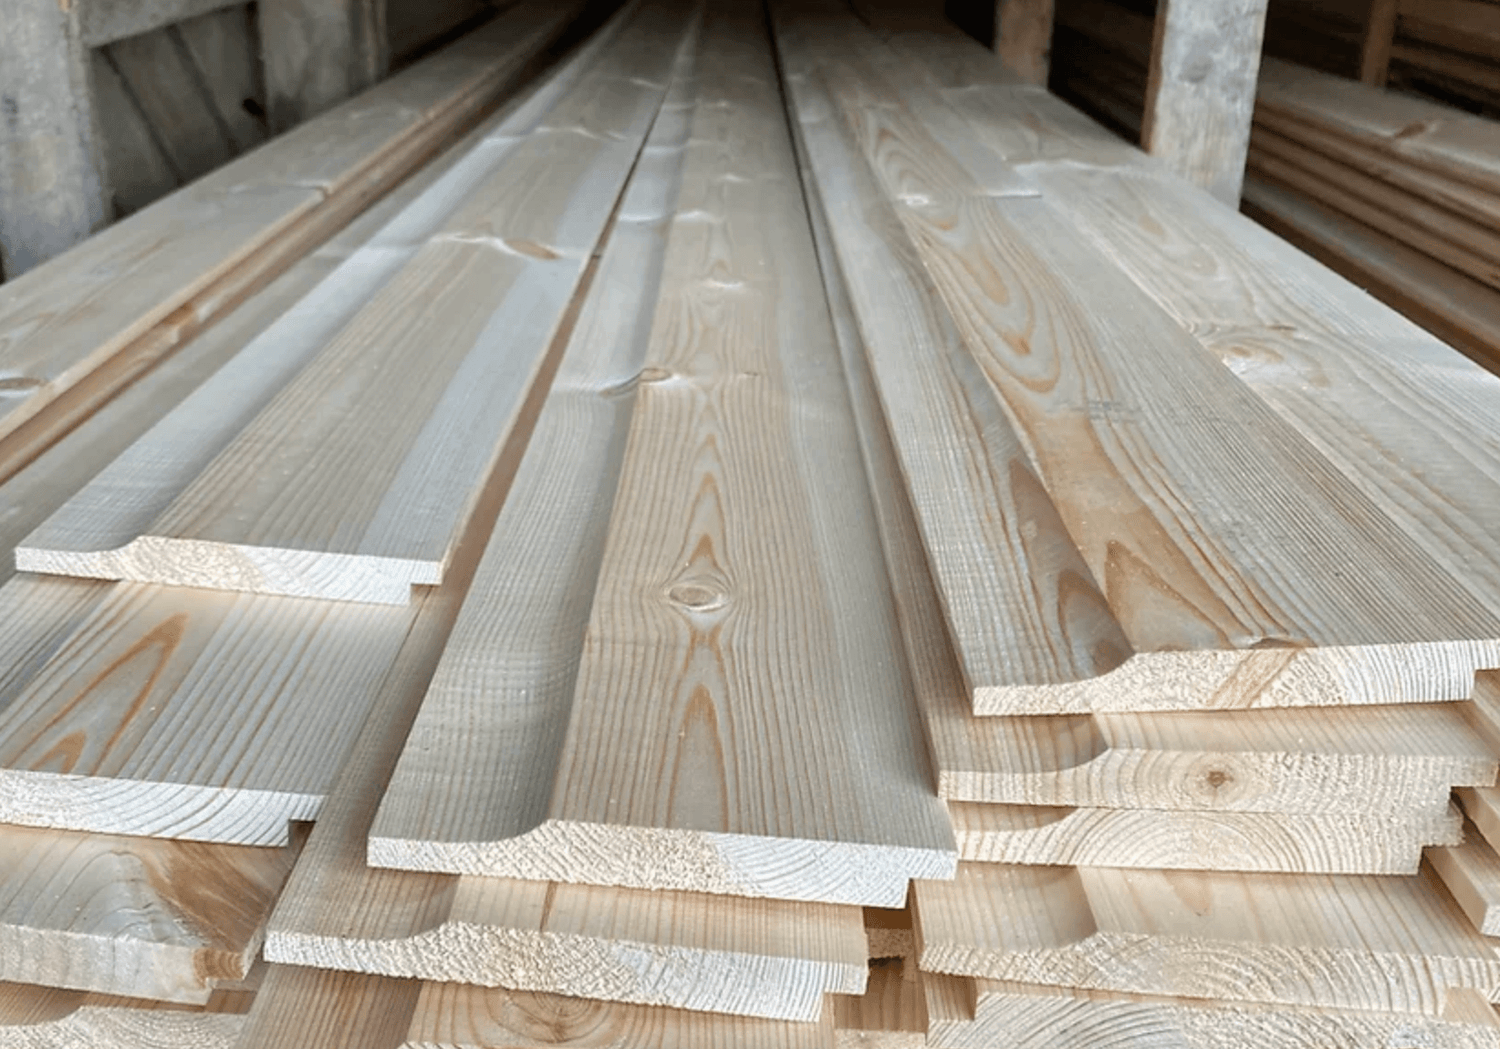 What is the difference between Shiplap & Loglap cladding?